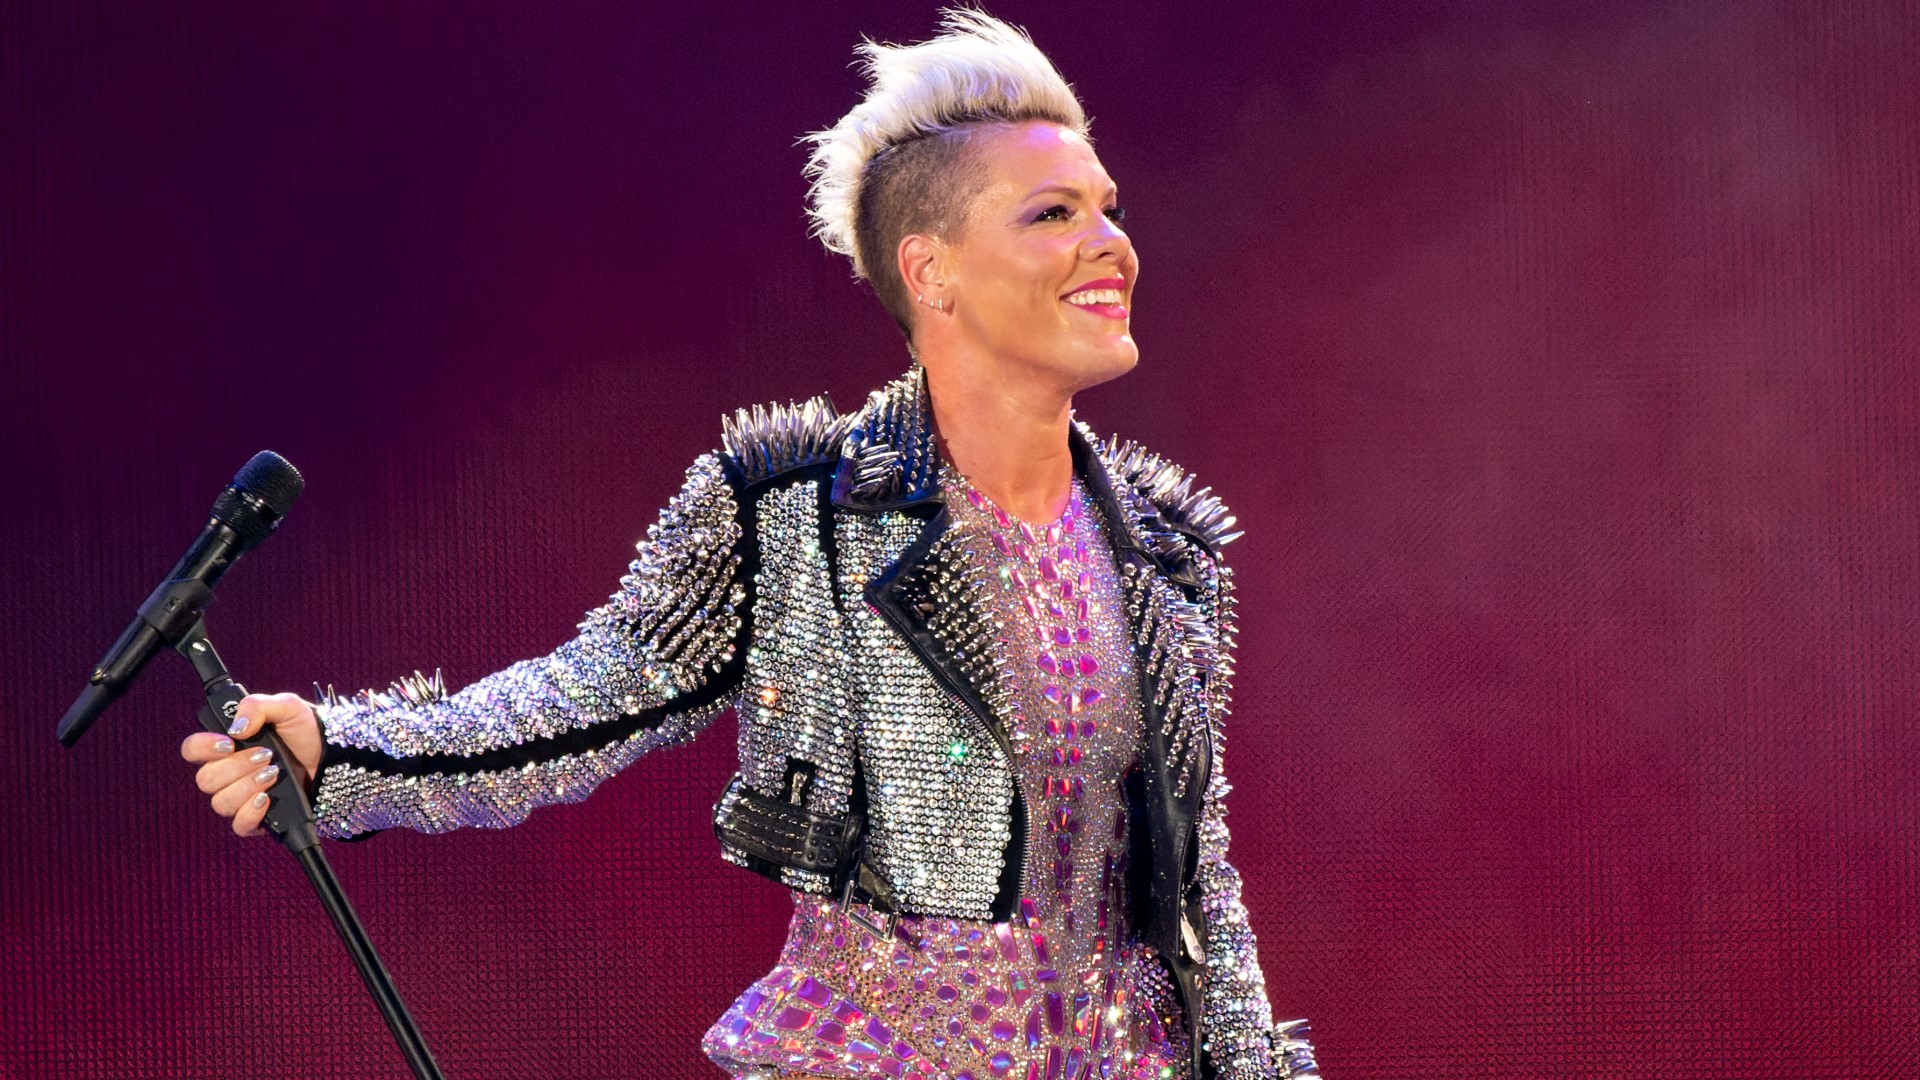 P!nk is coming to Wells Fargo Arena on Thursday, Oct. 24.